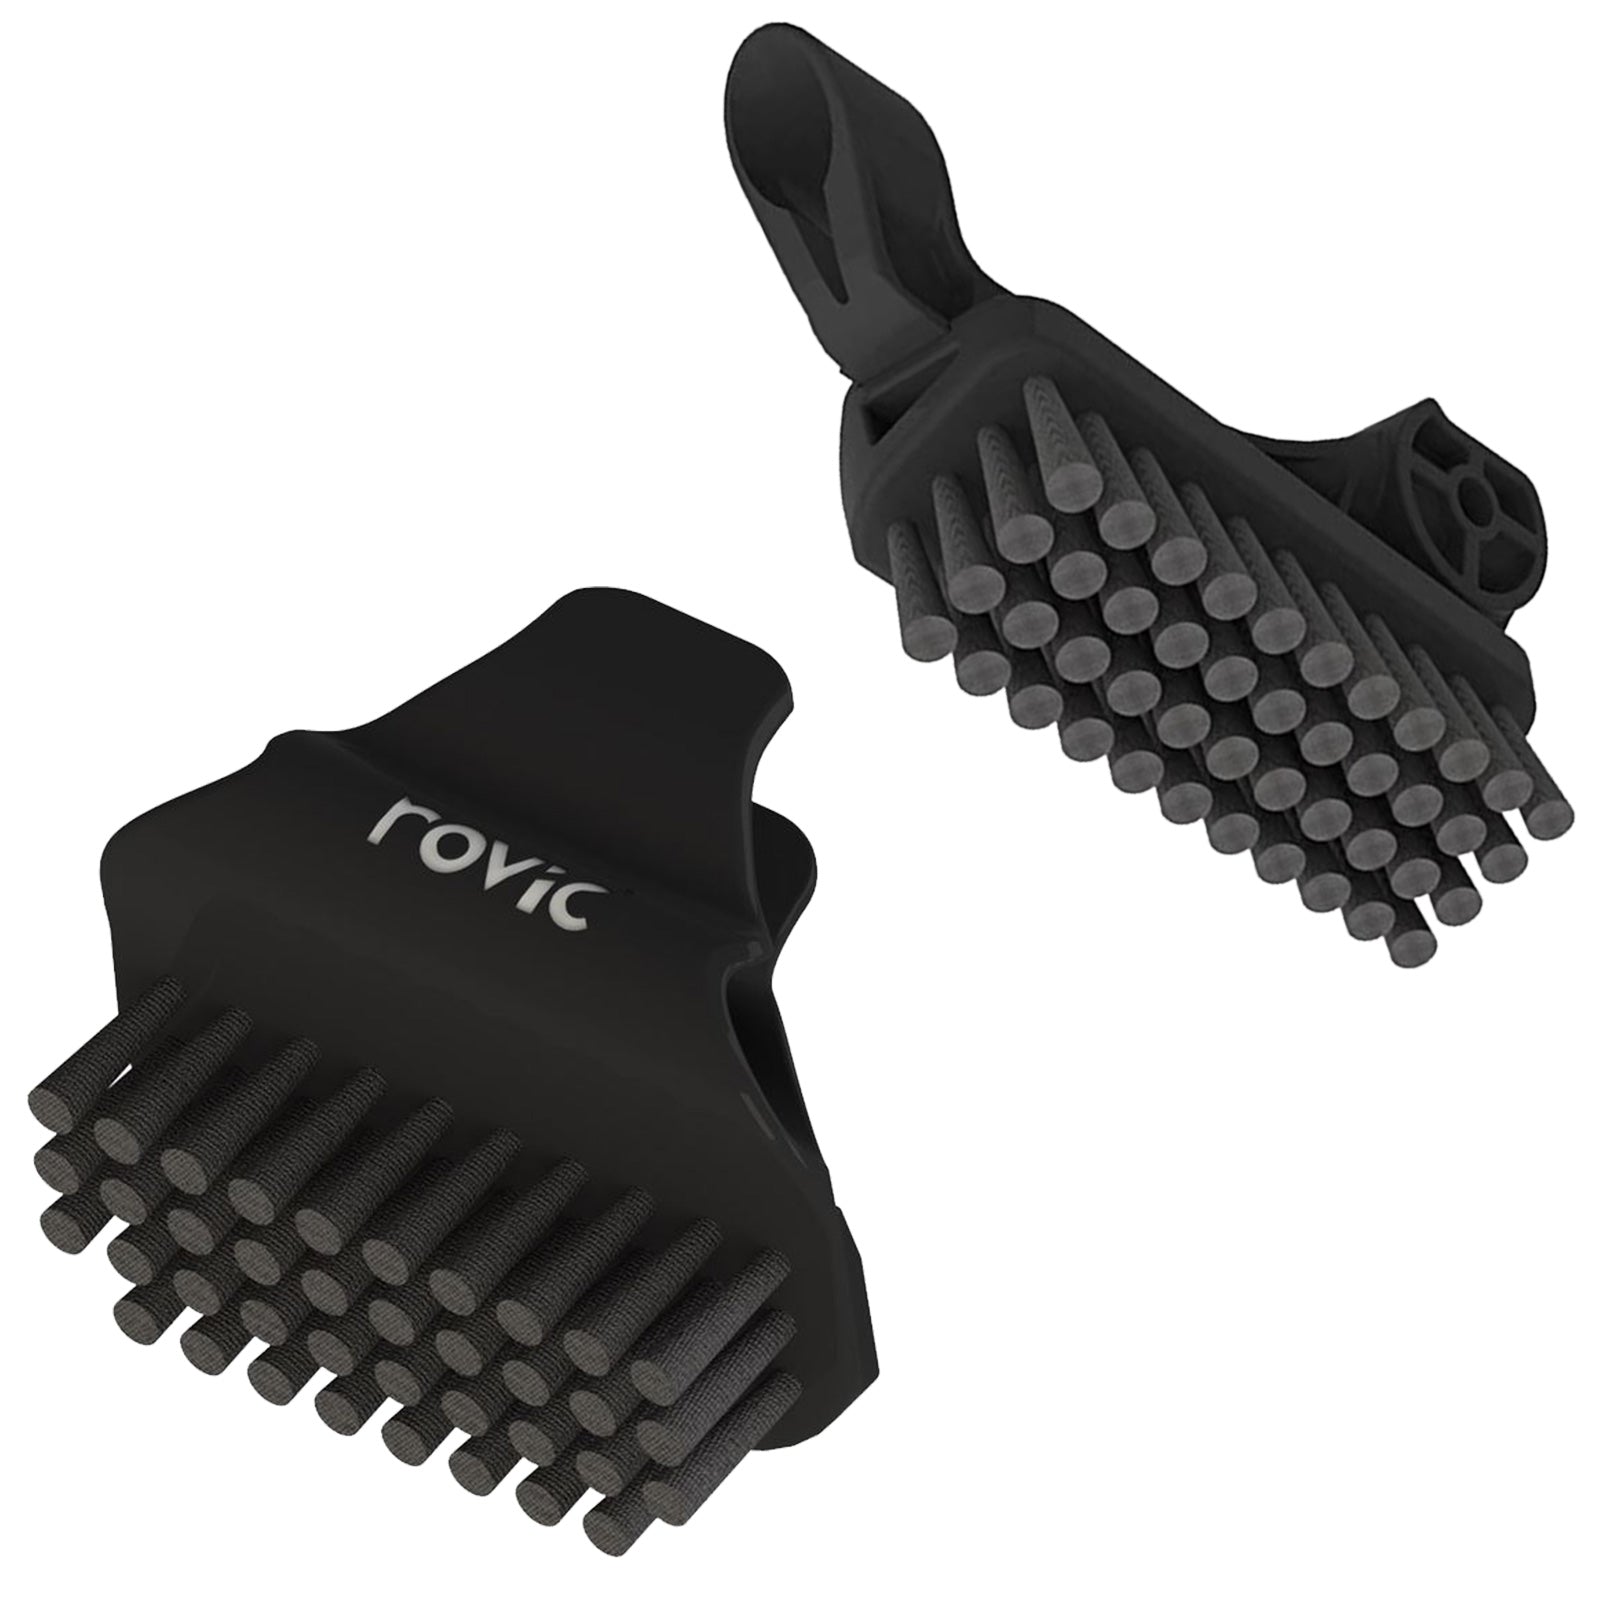 Clicgear Trolley Shoe Brushes